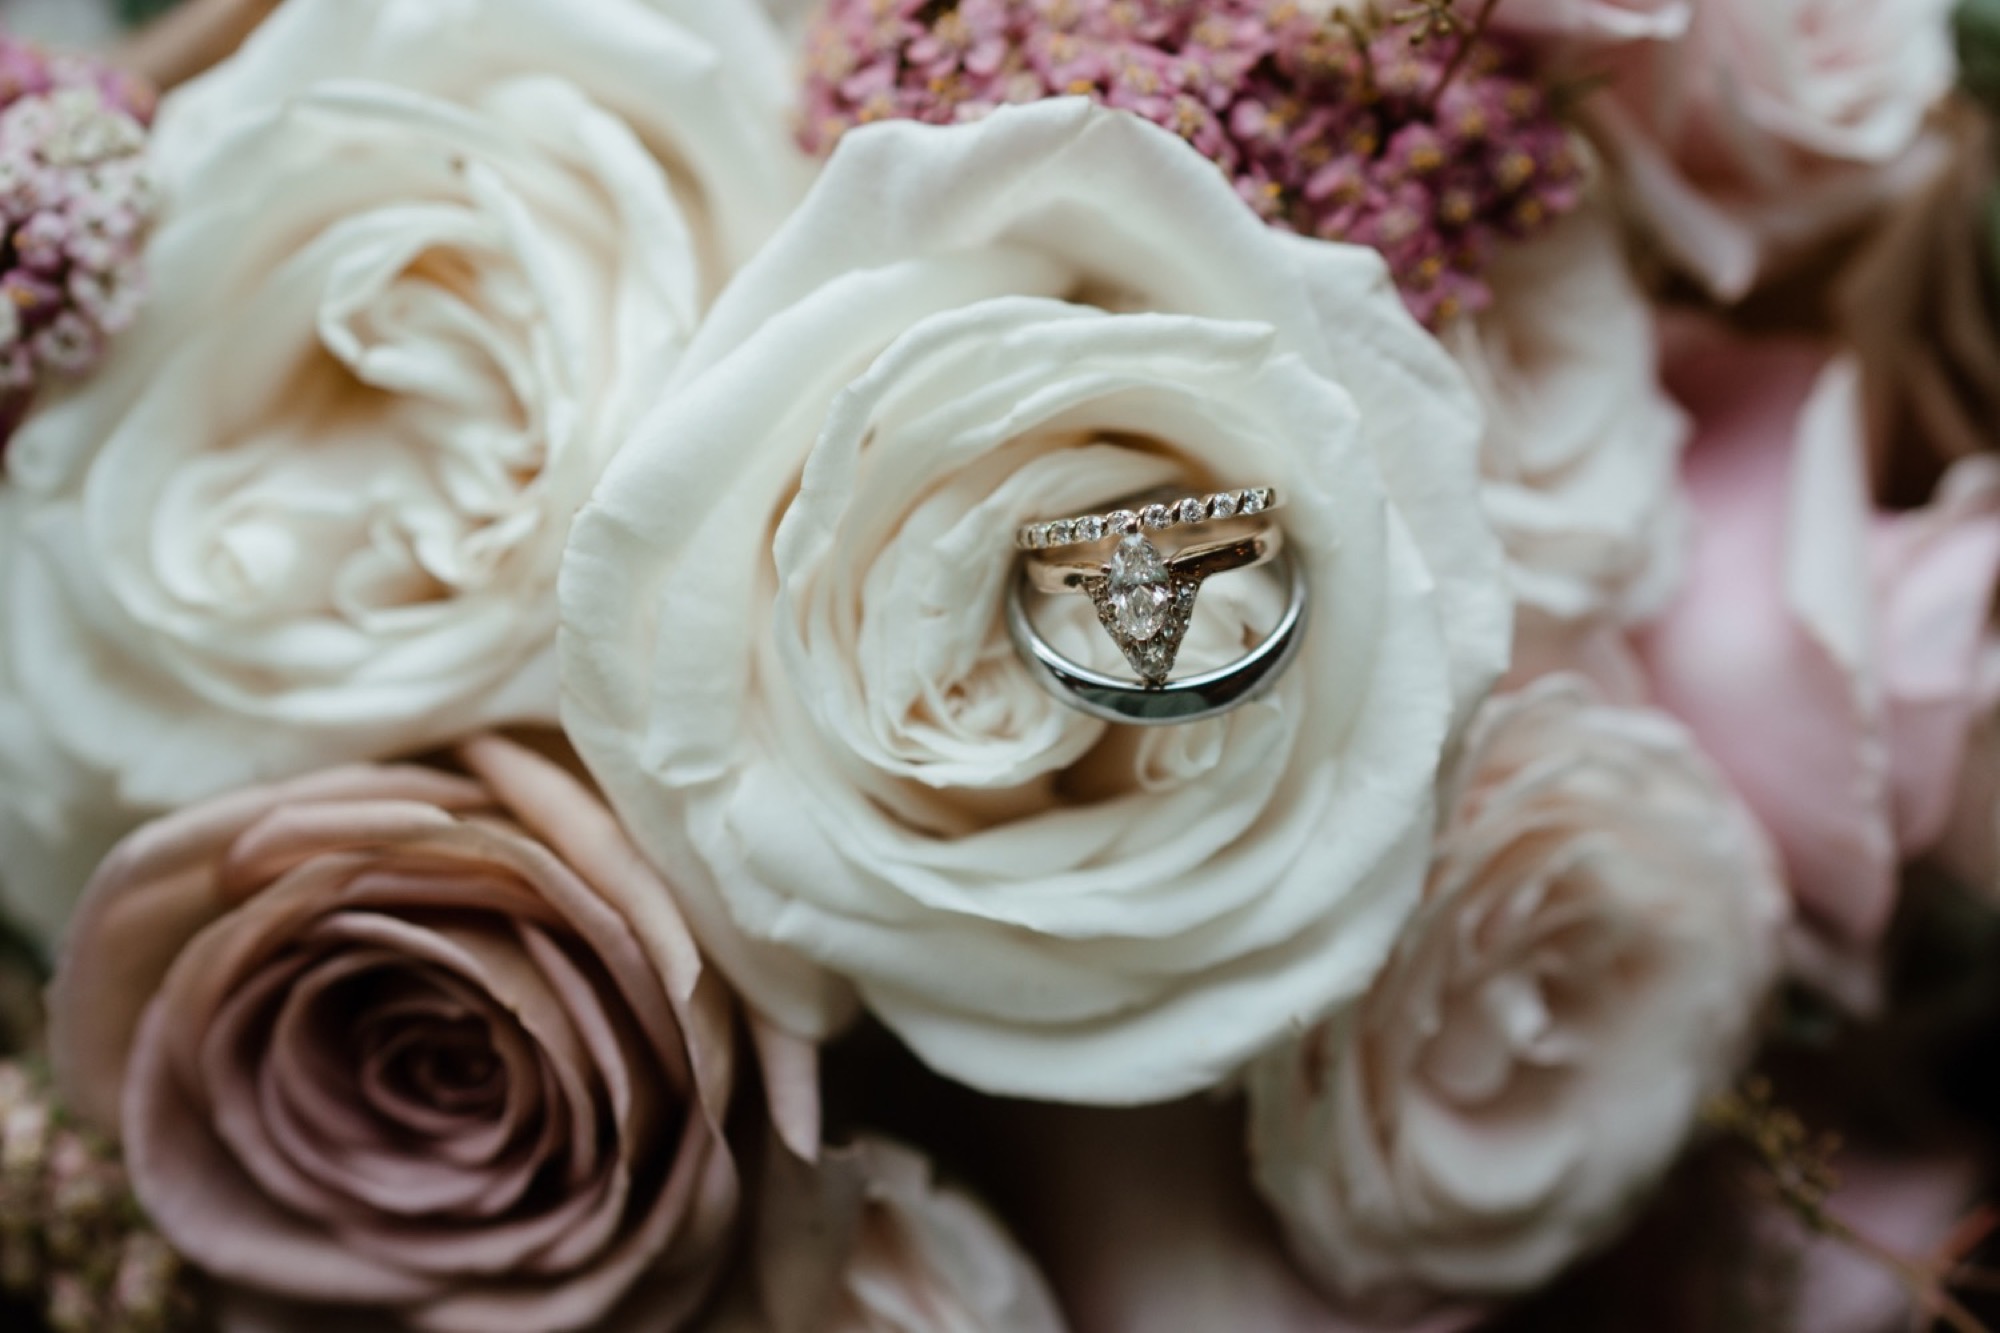 ring and flower details at 8th and main wedding